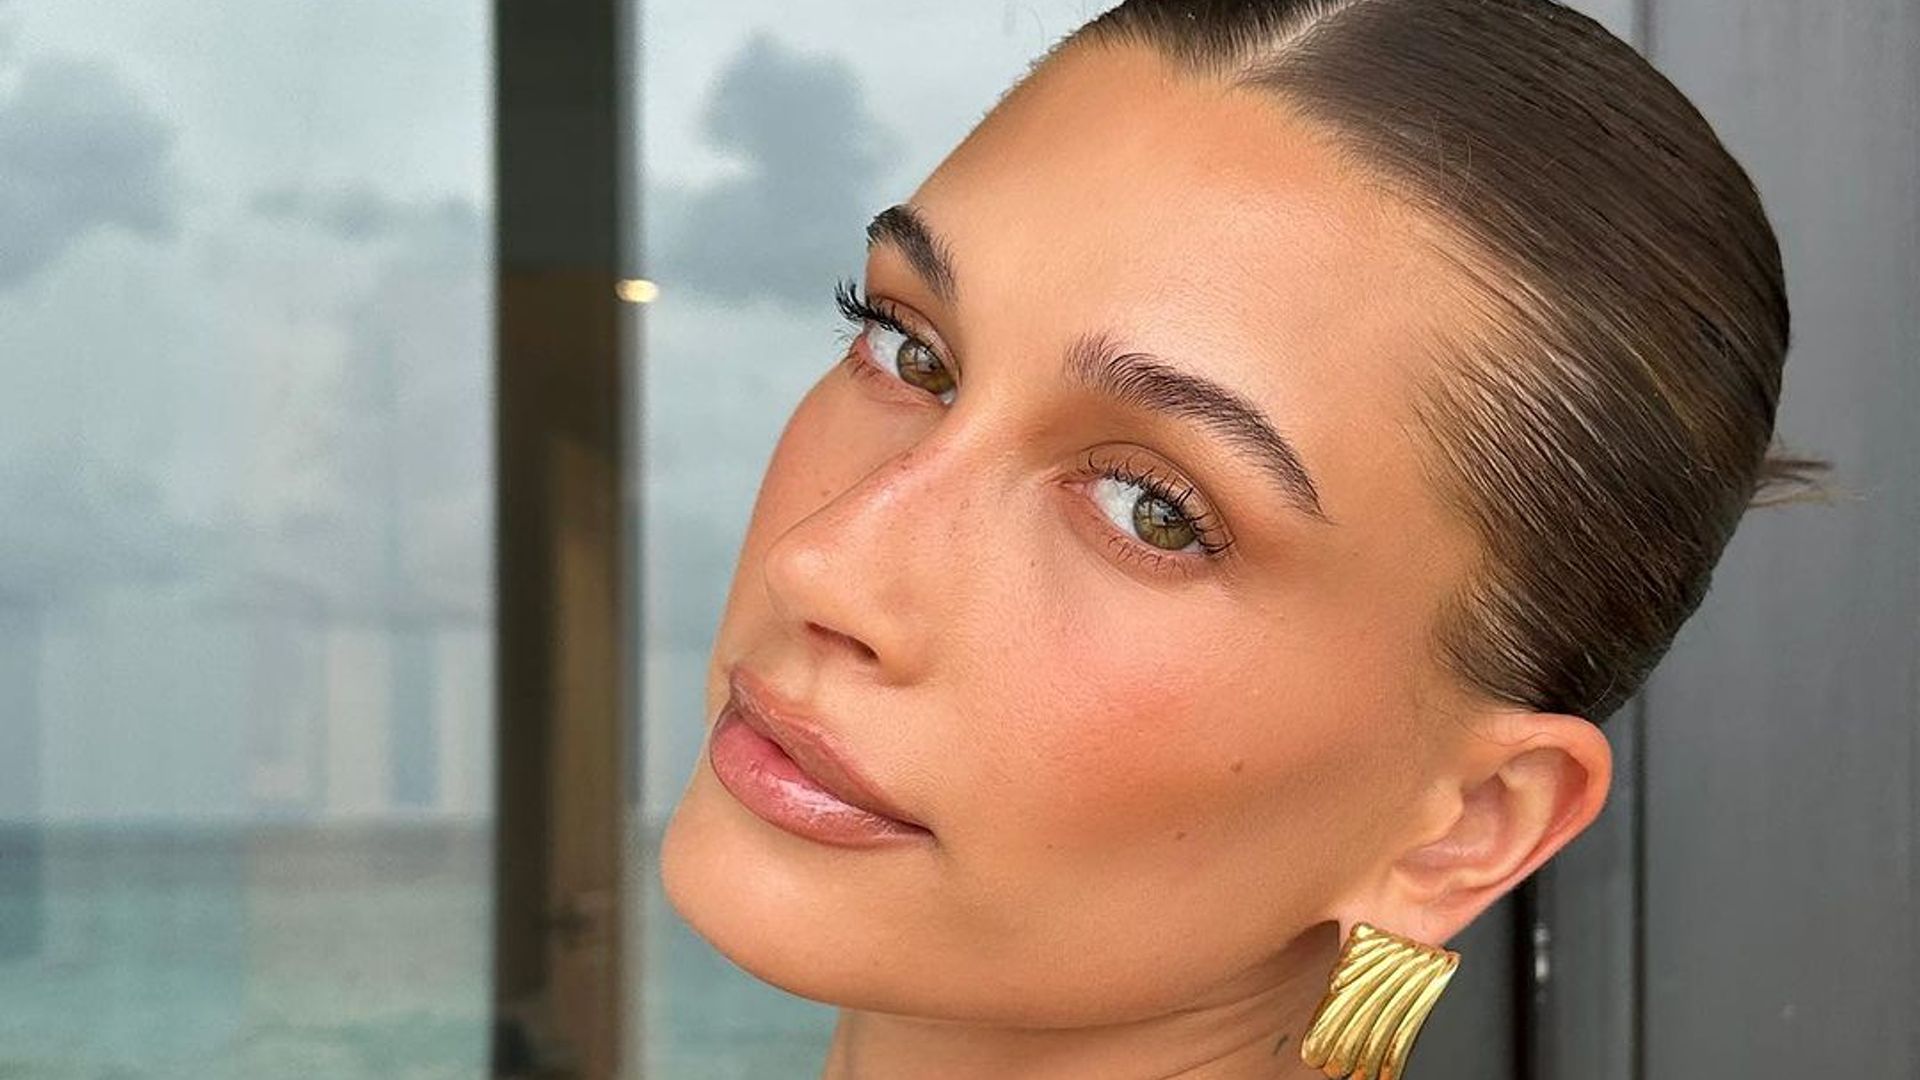 Hailey Bieber gets real about her struggle with 'Perioral Dermatitis'